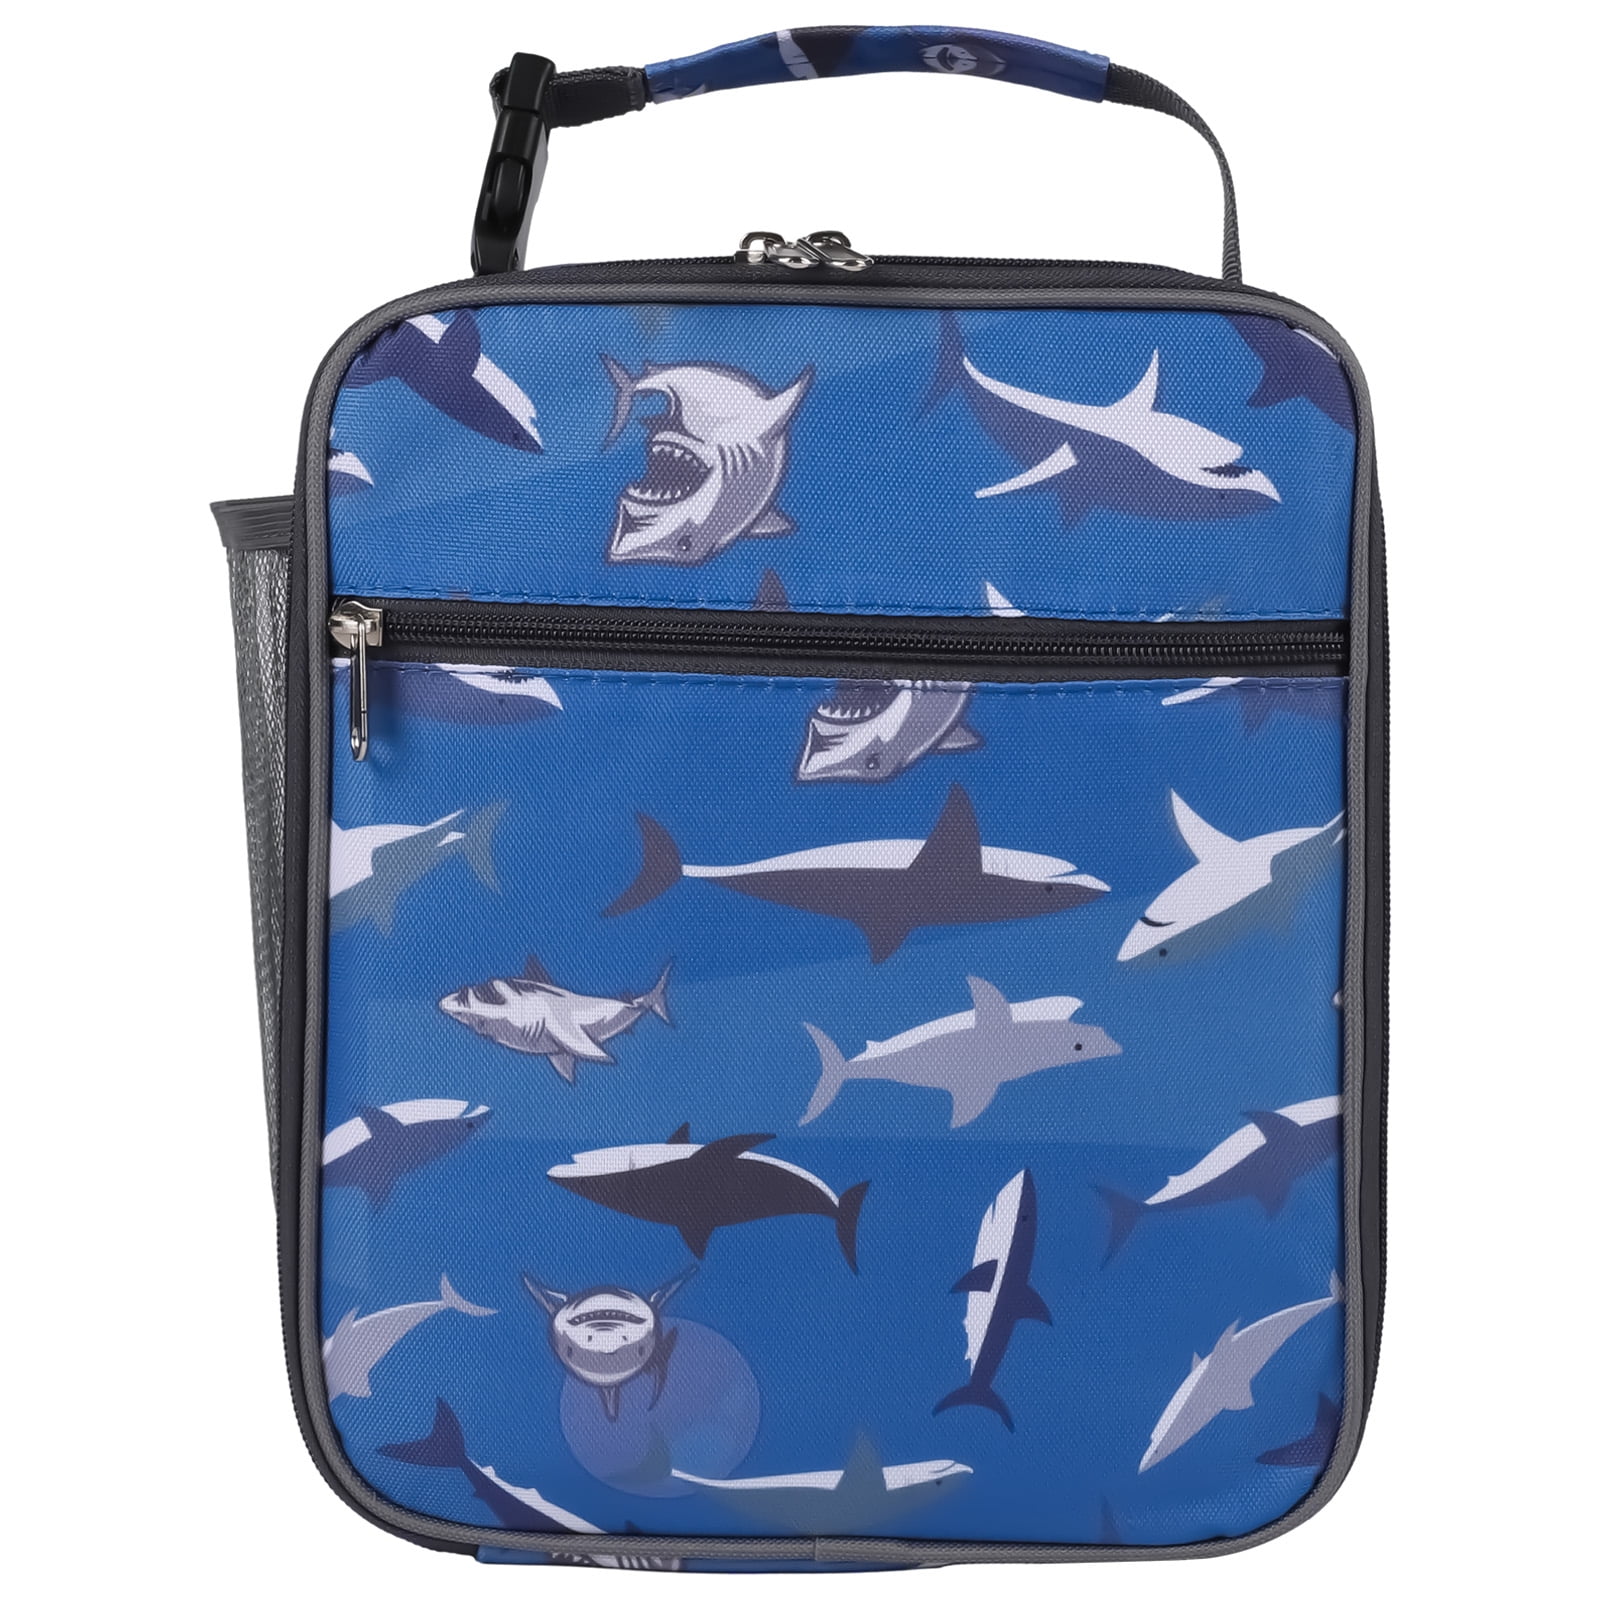  cuesr Lunch Box Kids Boys Girls Insulated Cooler Thermal Cute Lunch  Bag Tote for School,Shark: Home & Kitchen